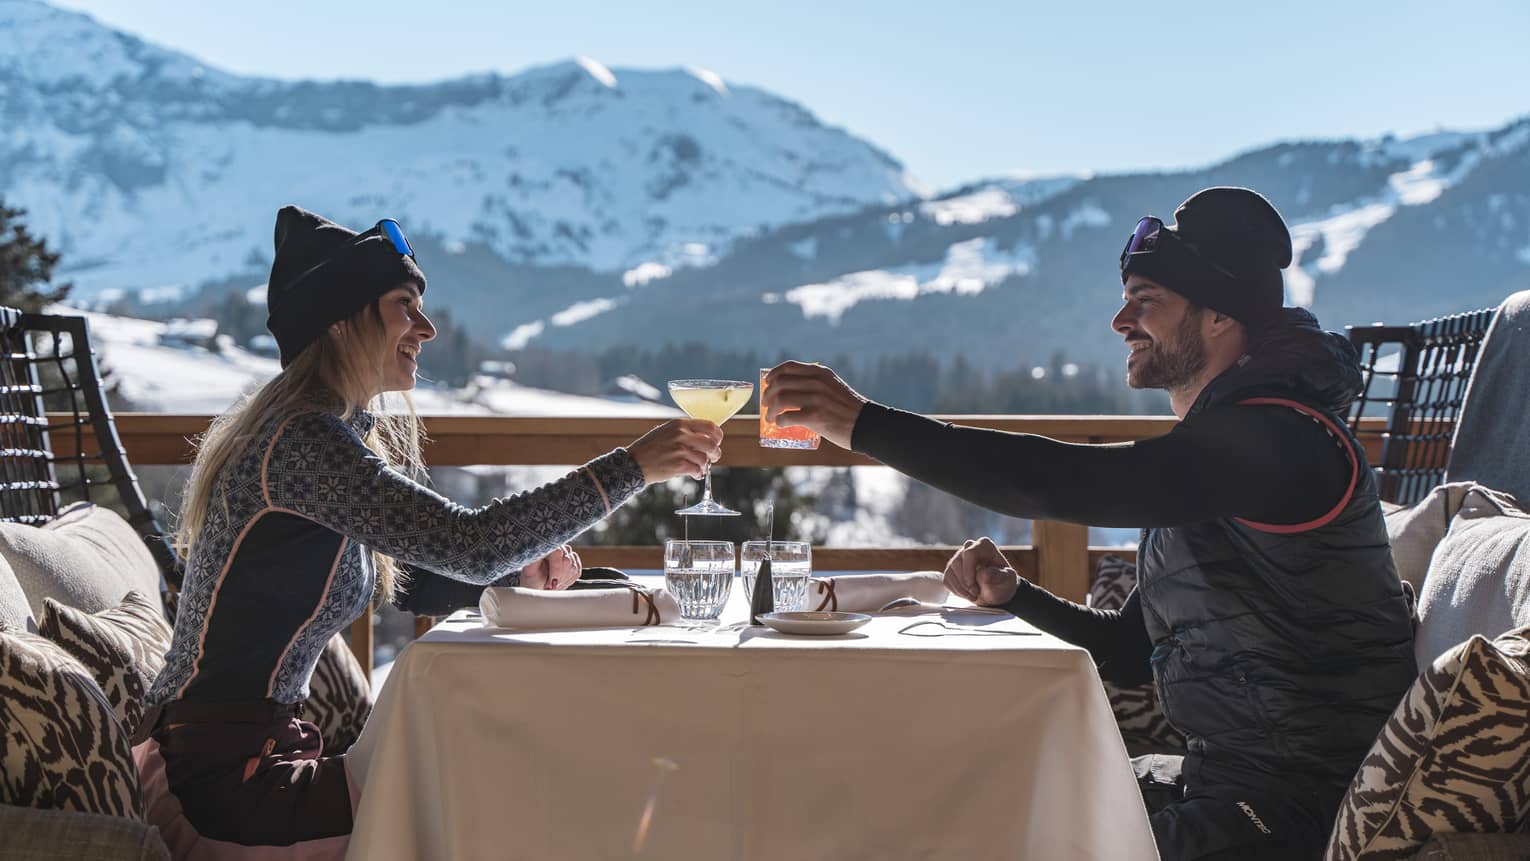 Two people drinking on a patio outside with snowy mountains in the distance